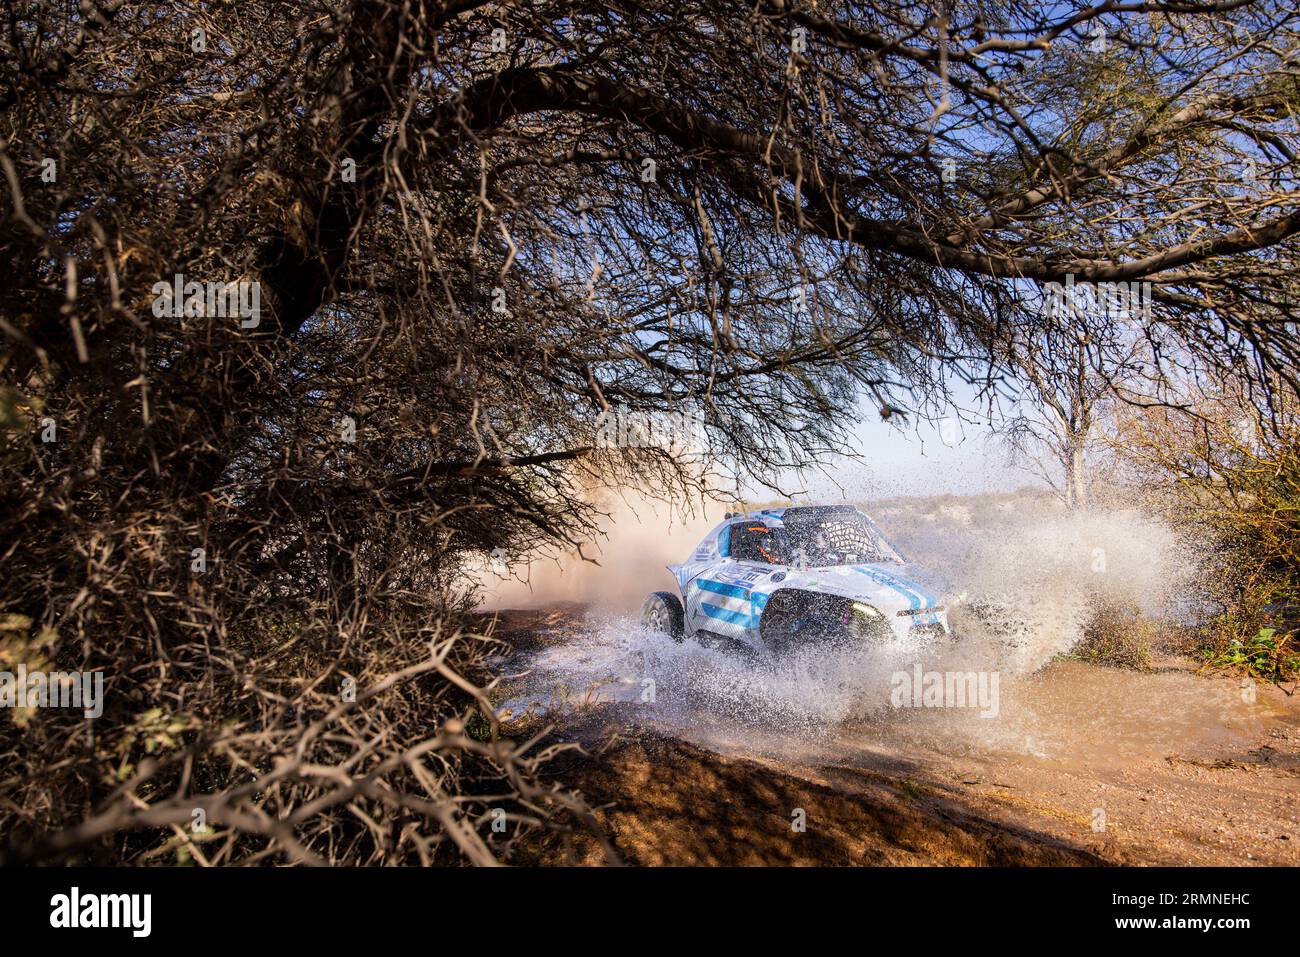 311 RODRIGUEZ Gabriel (arg), DE LA VEGA Santiago (arg), Wevers Sport, Taurus T3Max 4x4, action during the Stage 2 of the Desafio Ruta 40 2023 between La Rioja and Belén, 4th round of the 2023 World Rally-Raid Championship, on August 29, 2023 in Belén, Argentina - Photo Julien Delfosse/DPPI Credit: DPPI Media/Alamy Live News Stock Photo